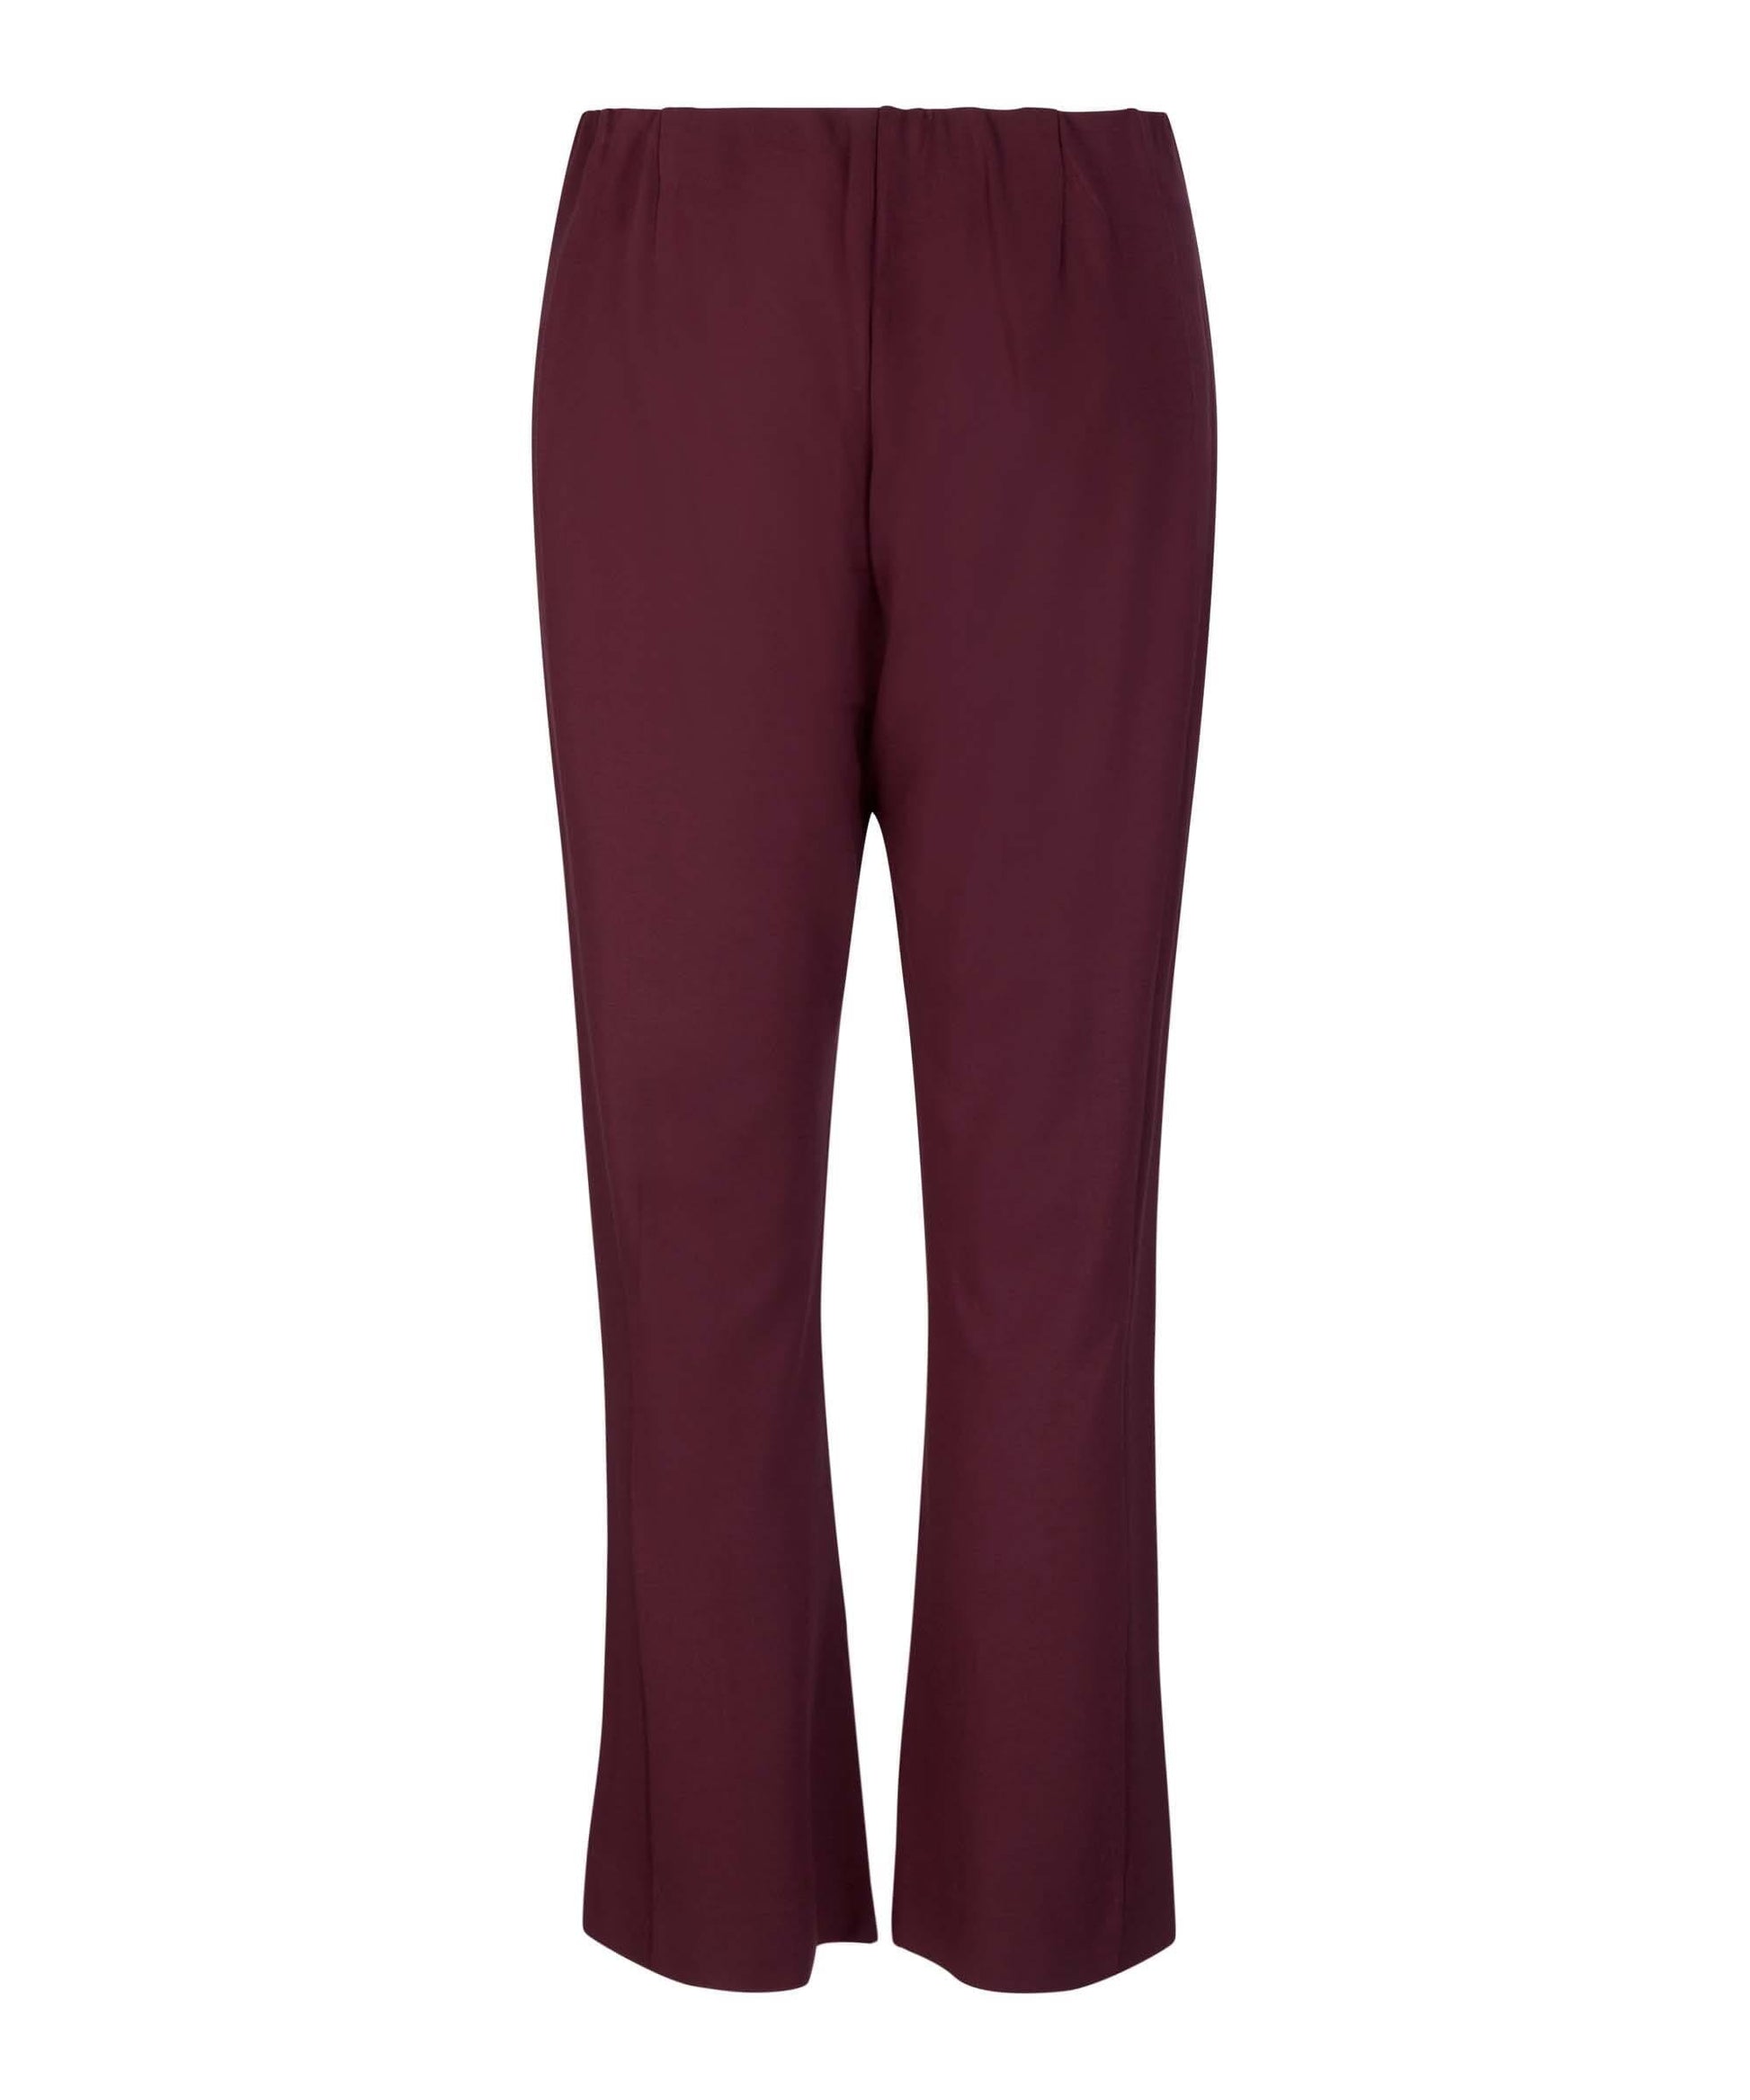 Paba Bootcut leg Trousers in Port Royale Trousers Masai 